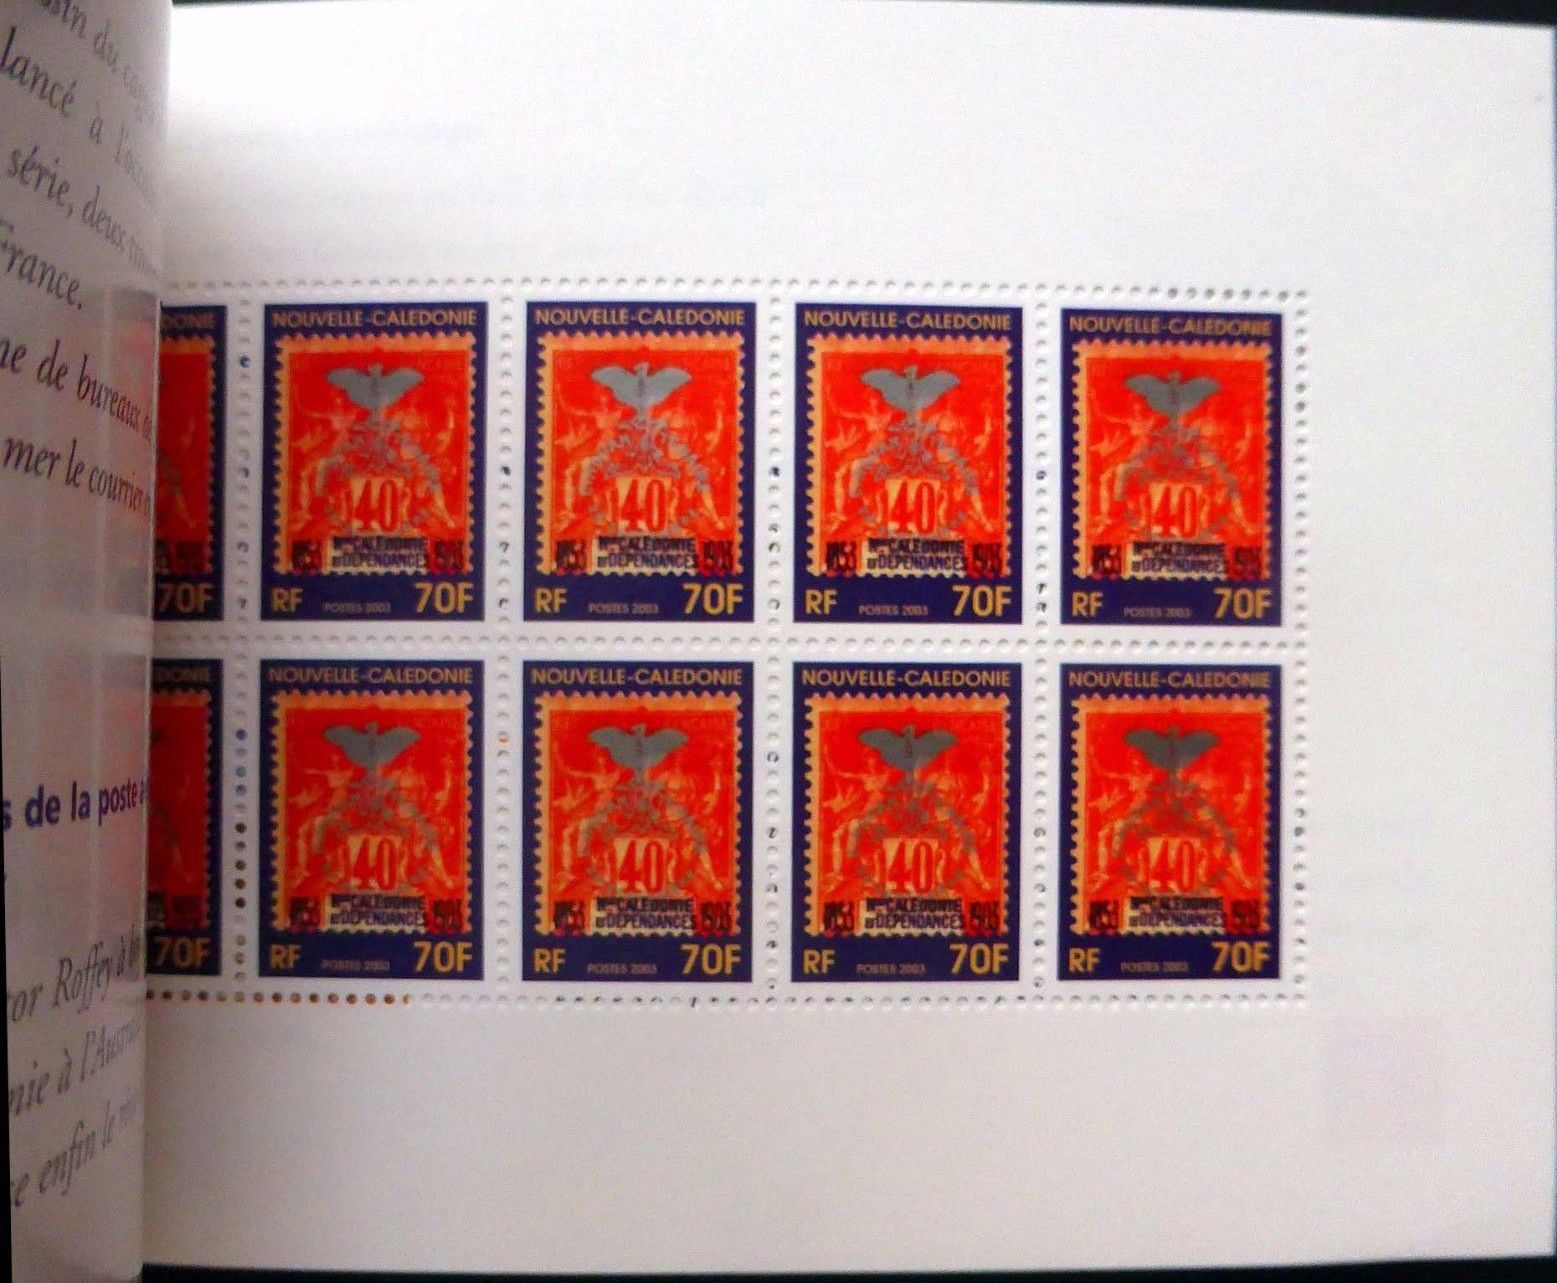 new caledonia 913A booklet pane